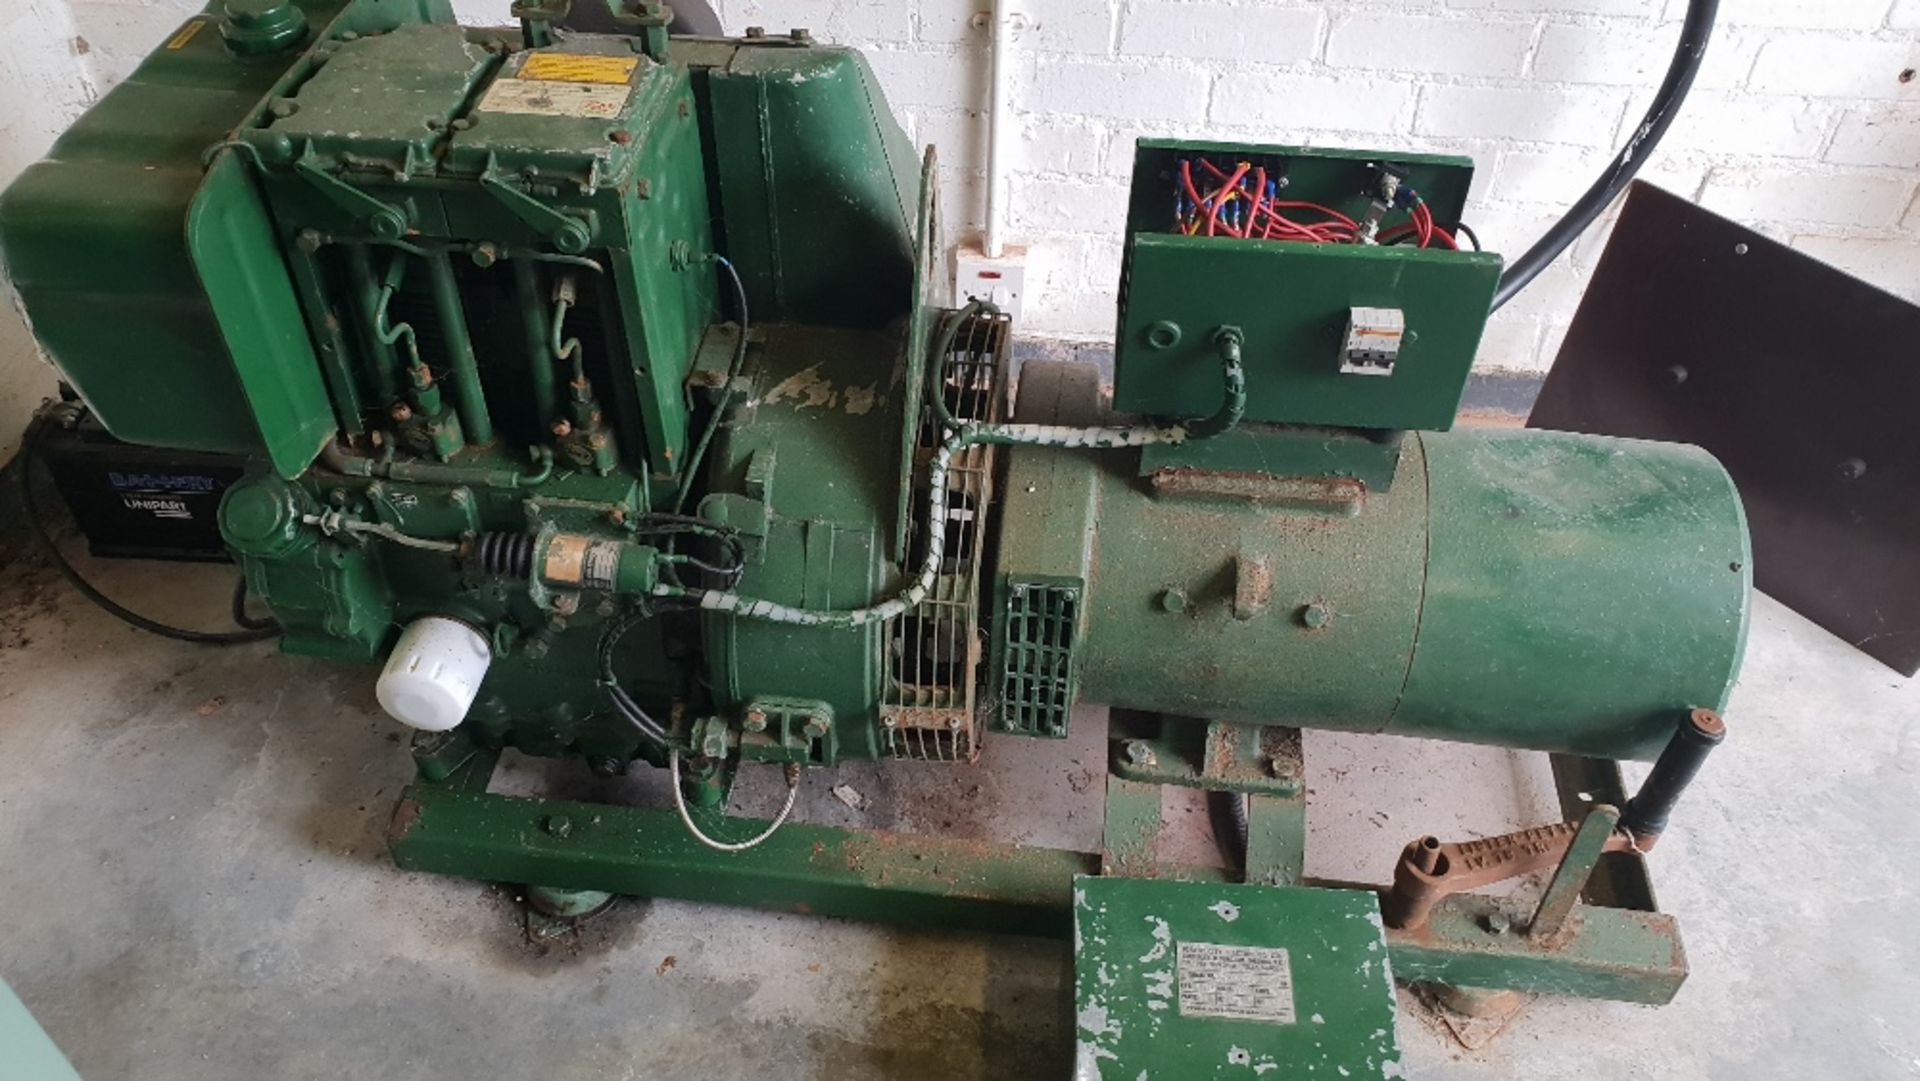 Diesel Generator Lister, 10 KVA, 47 hrs recorded. Stored near Ilketshall St Andrew, Beccles.